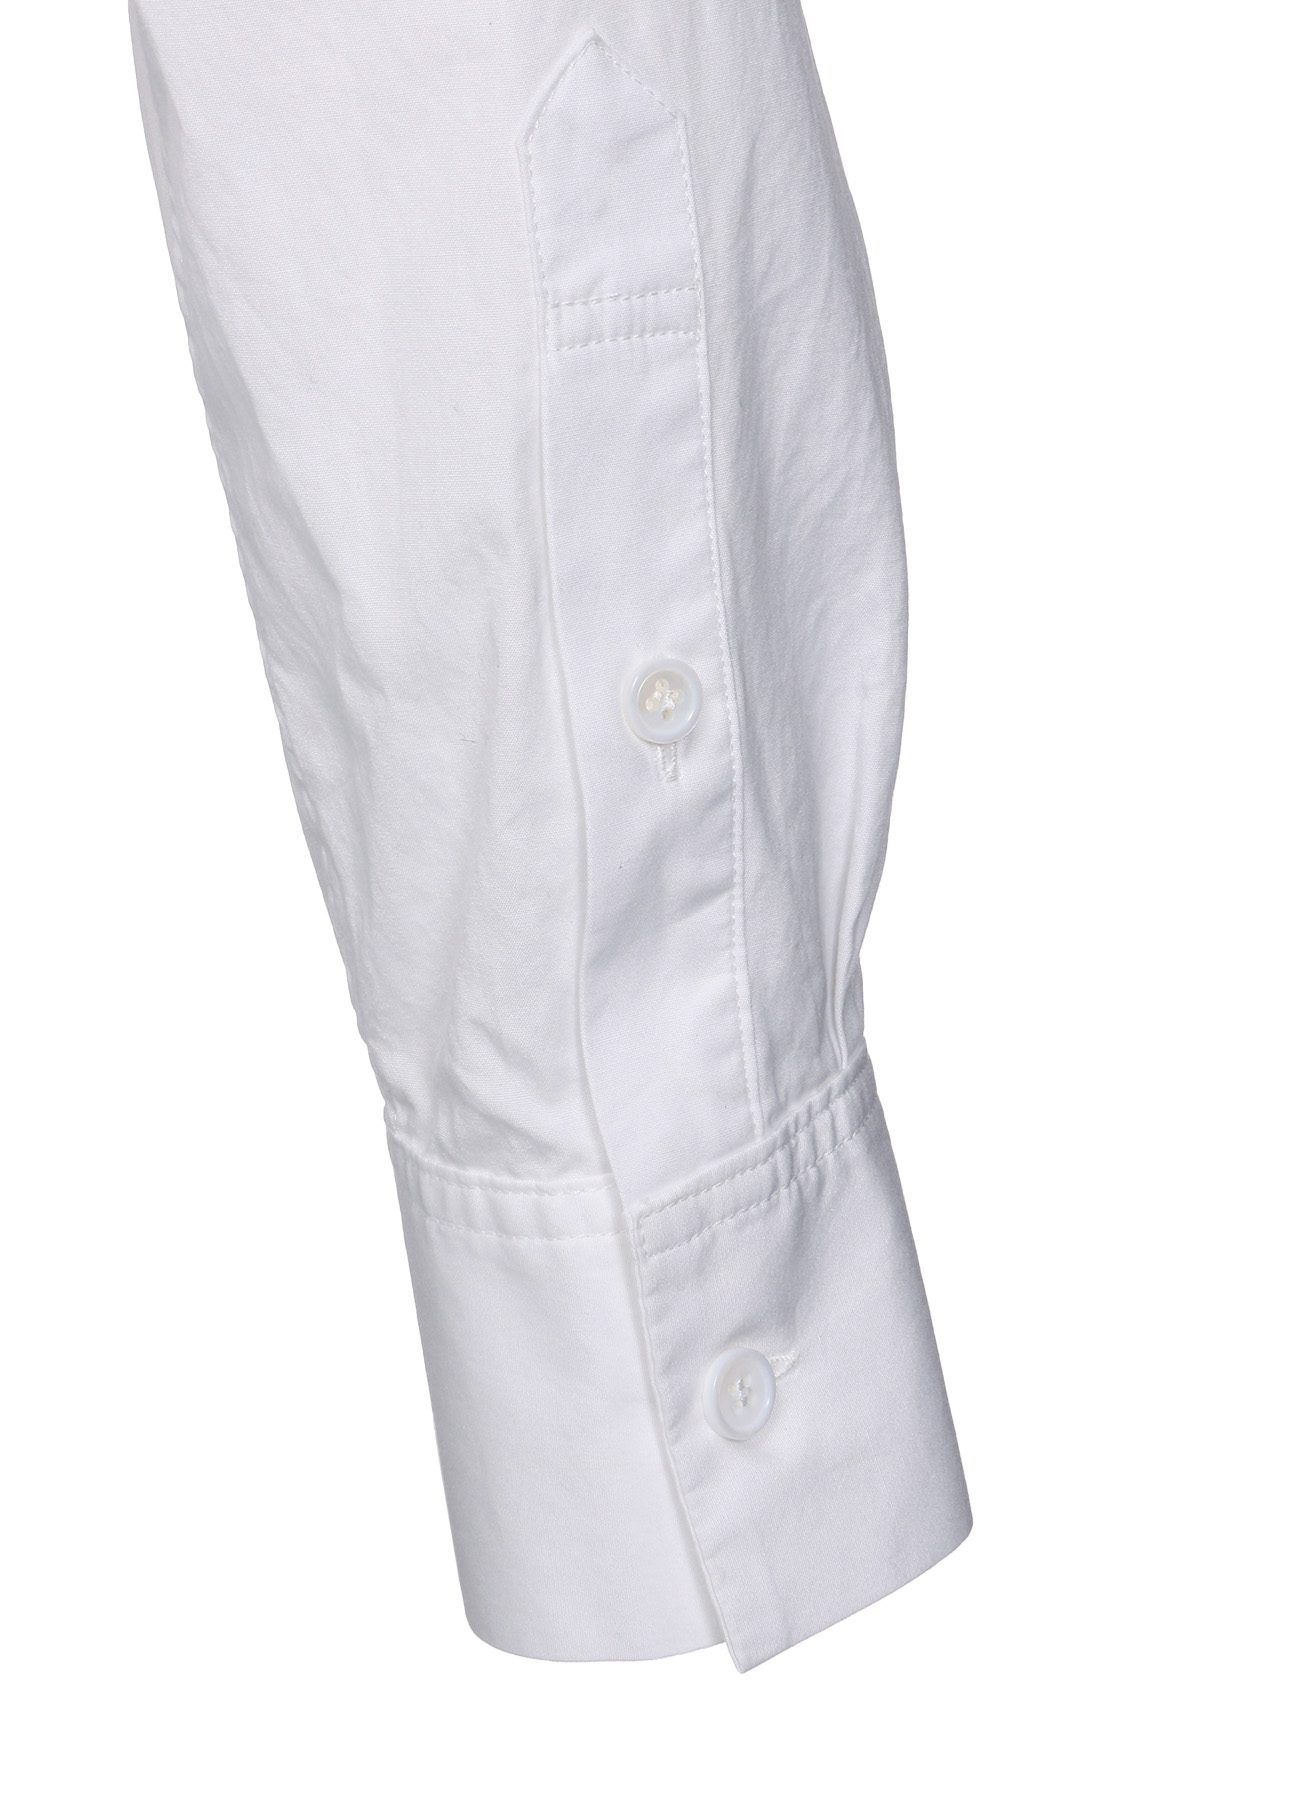 COTTON BROAD CLOTH DECONSTRUCTED CHEST POCKETS SHIRT